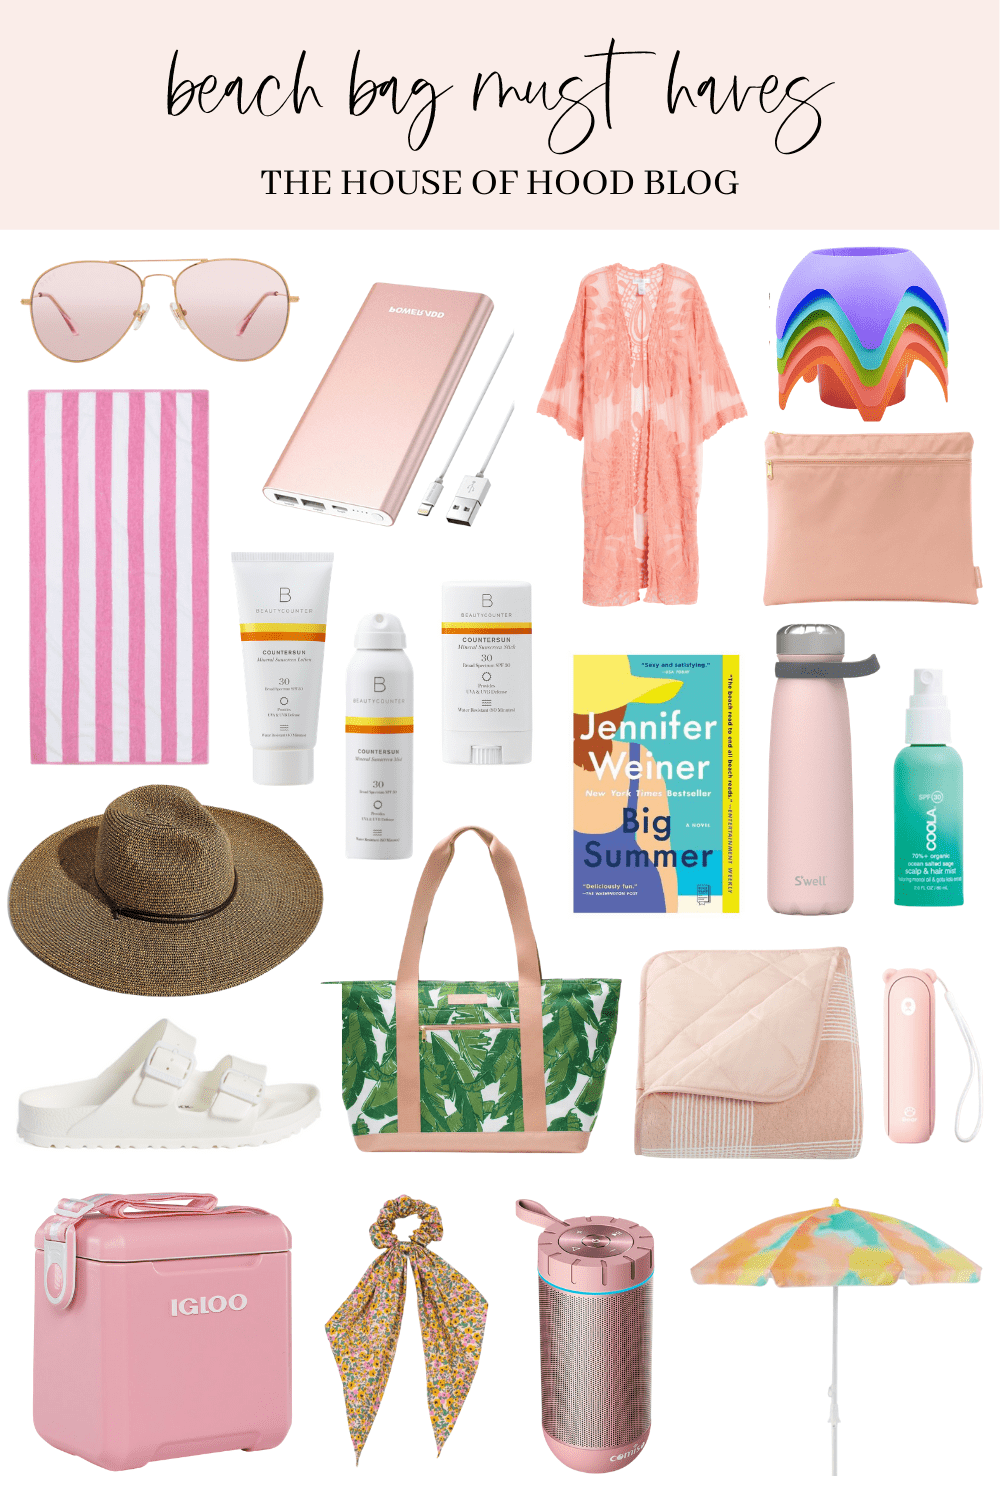 My 20 Beach Bag Essentials For Your Family My Life Well Loved | vlr.eng.br